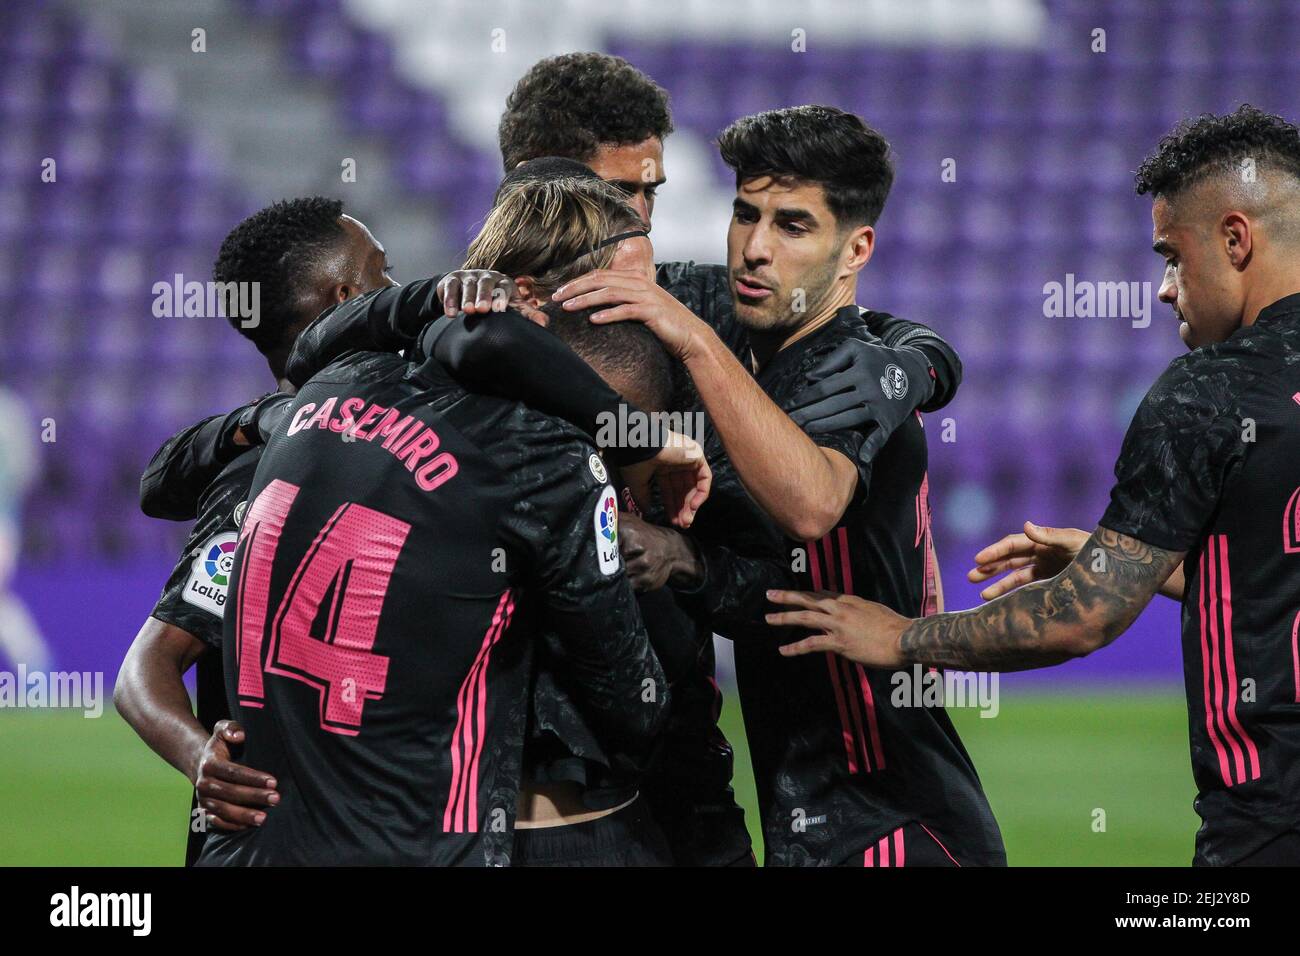 Carlos Henrique Casemiro of Real Madrid celebrates a goal during the Spanish championship La Liga football match between Real Valladolid / LM Stock Photo